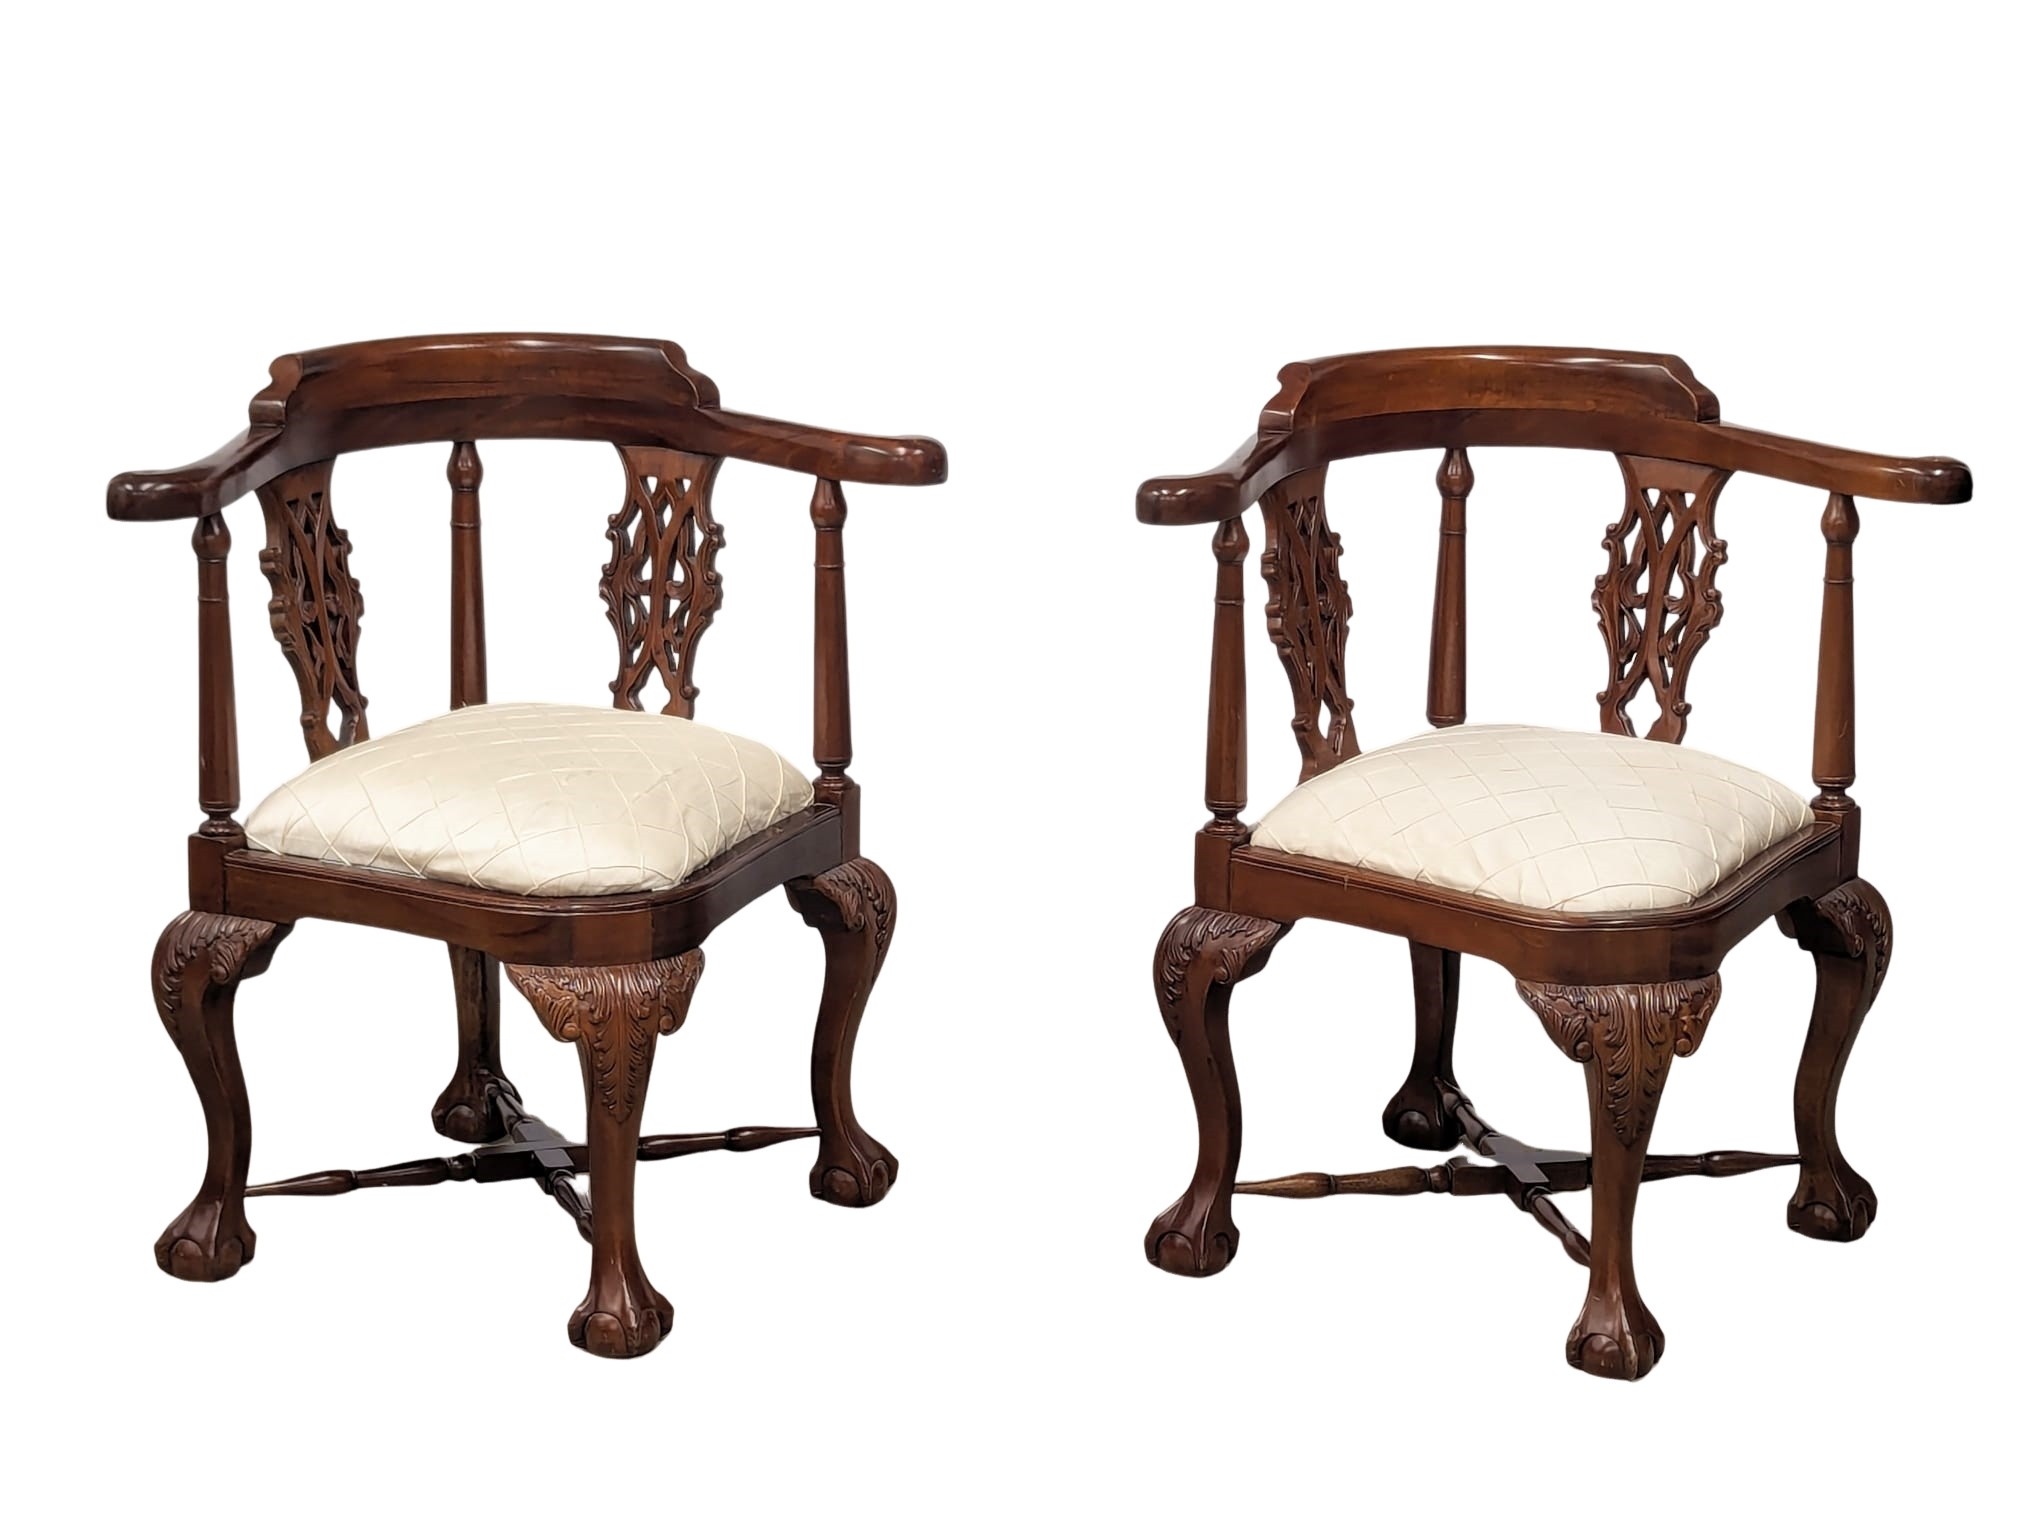 A pair of Chippendale Style mahogany corner armchairs on ball and claw feet.